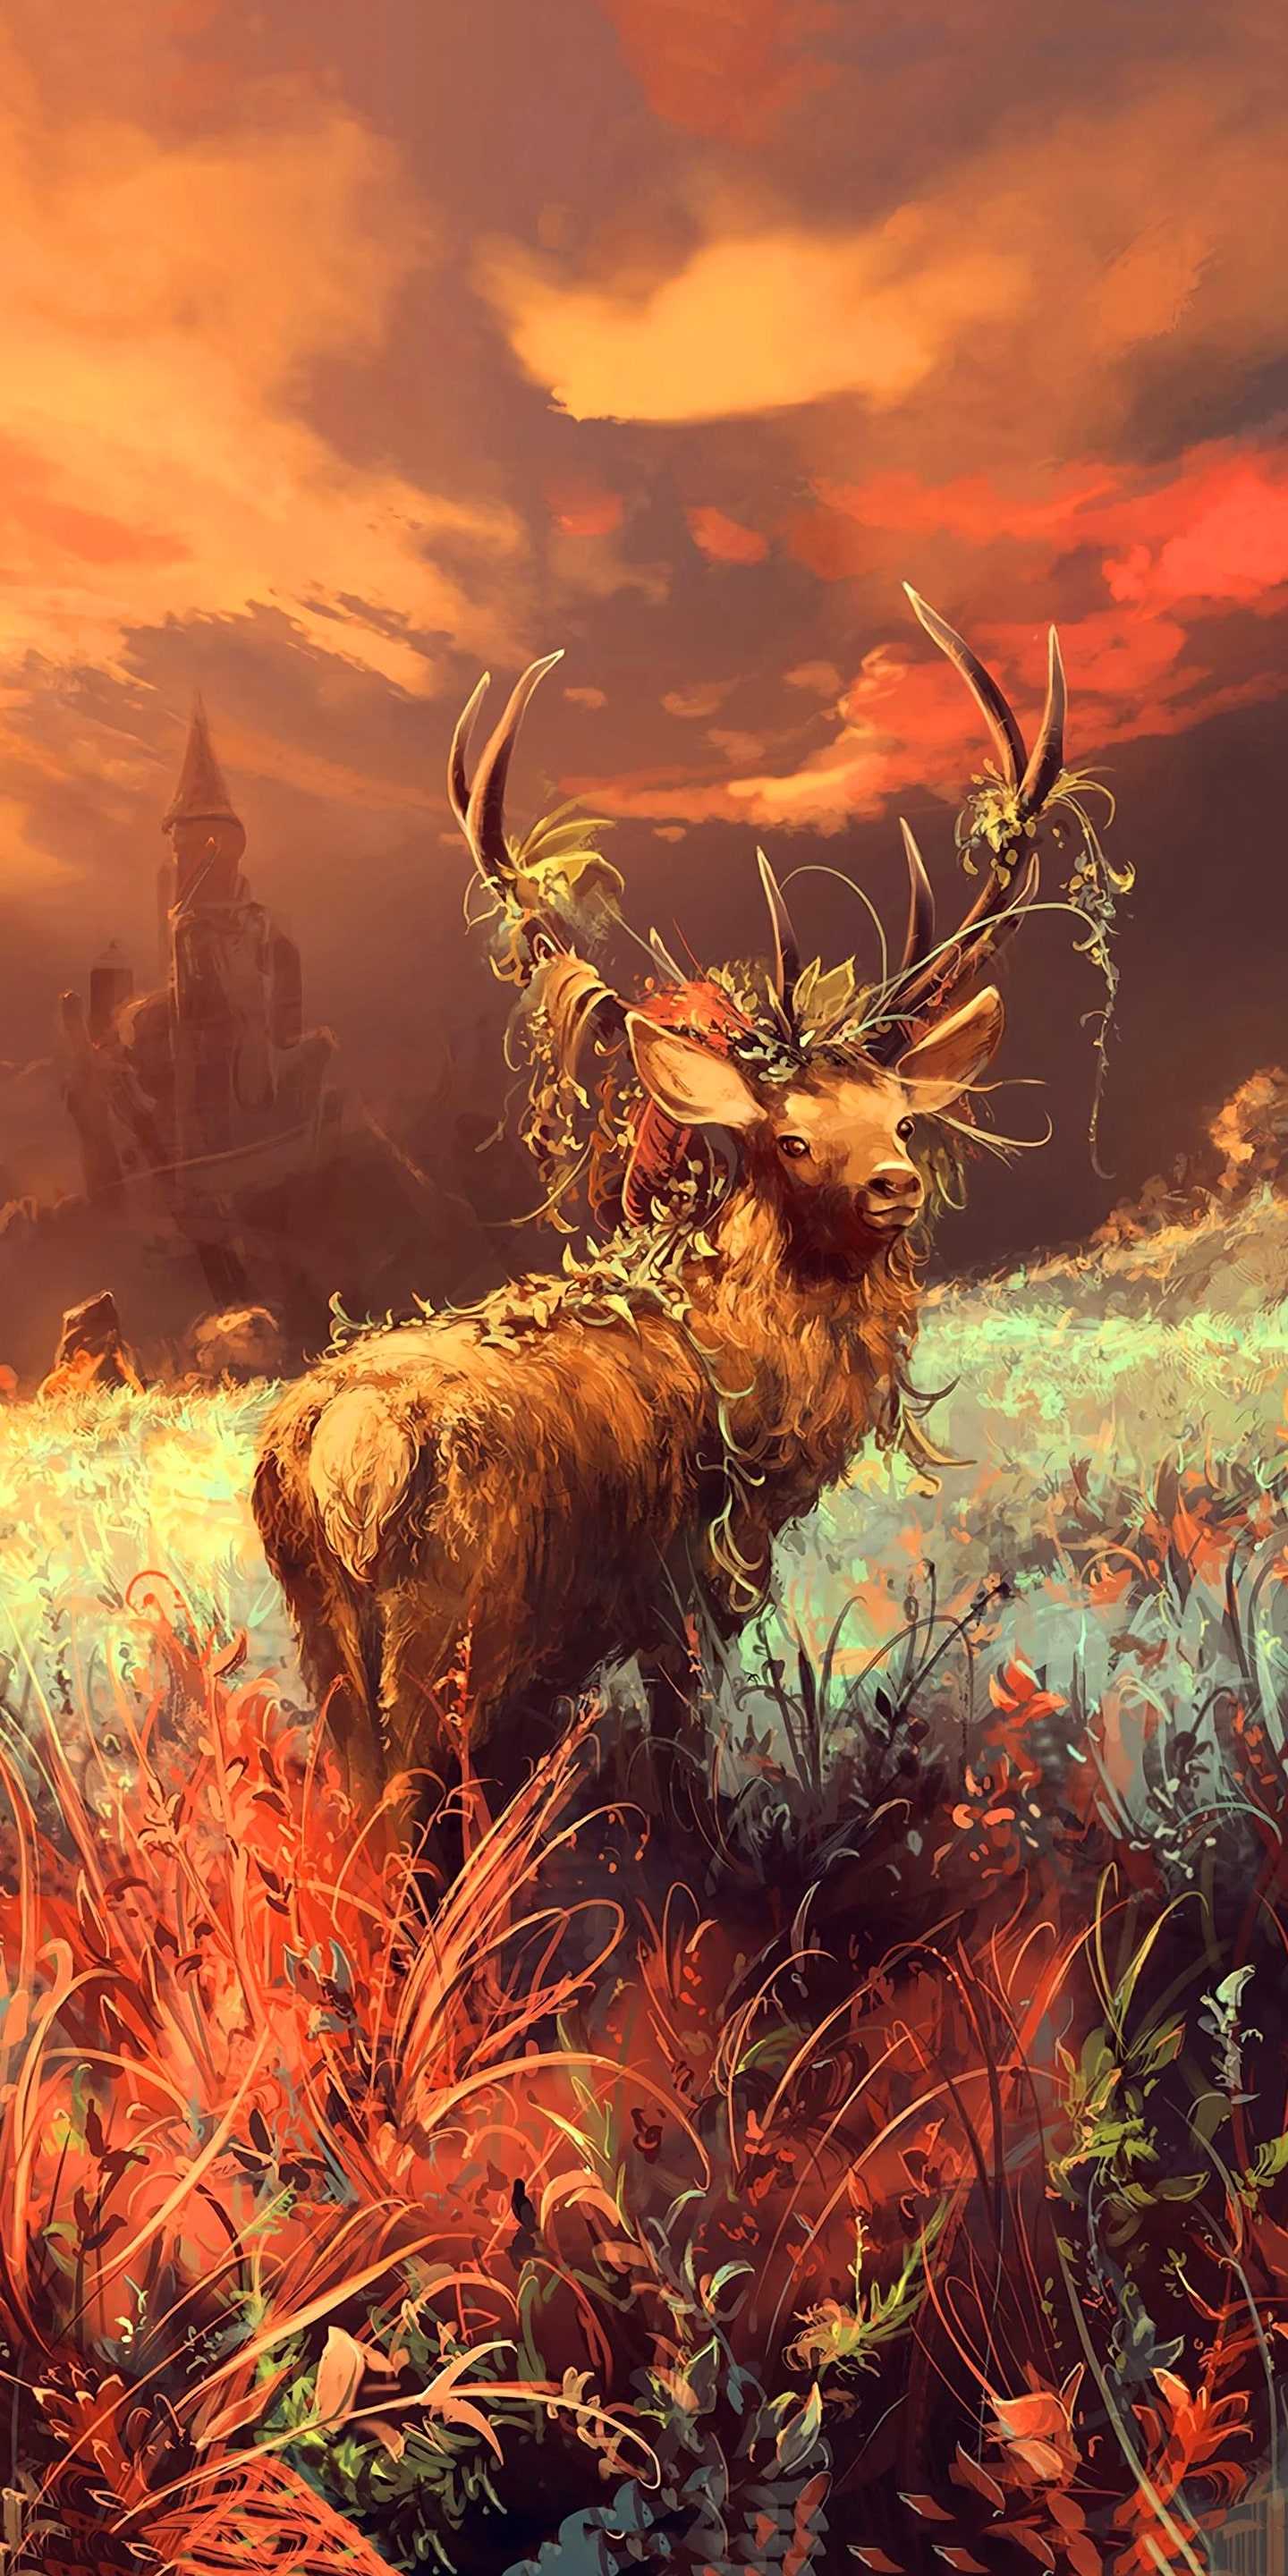 A painting of an animal in the grass - Deer